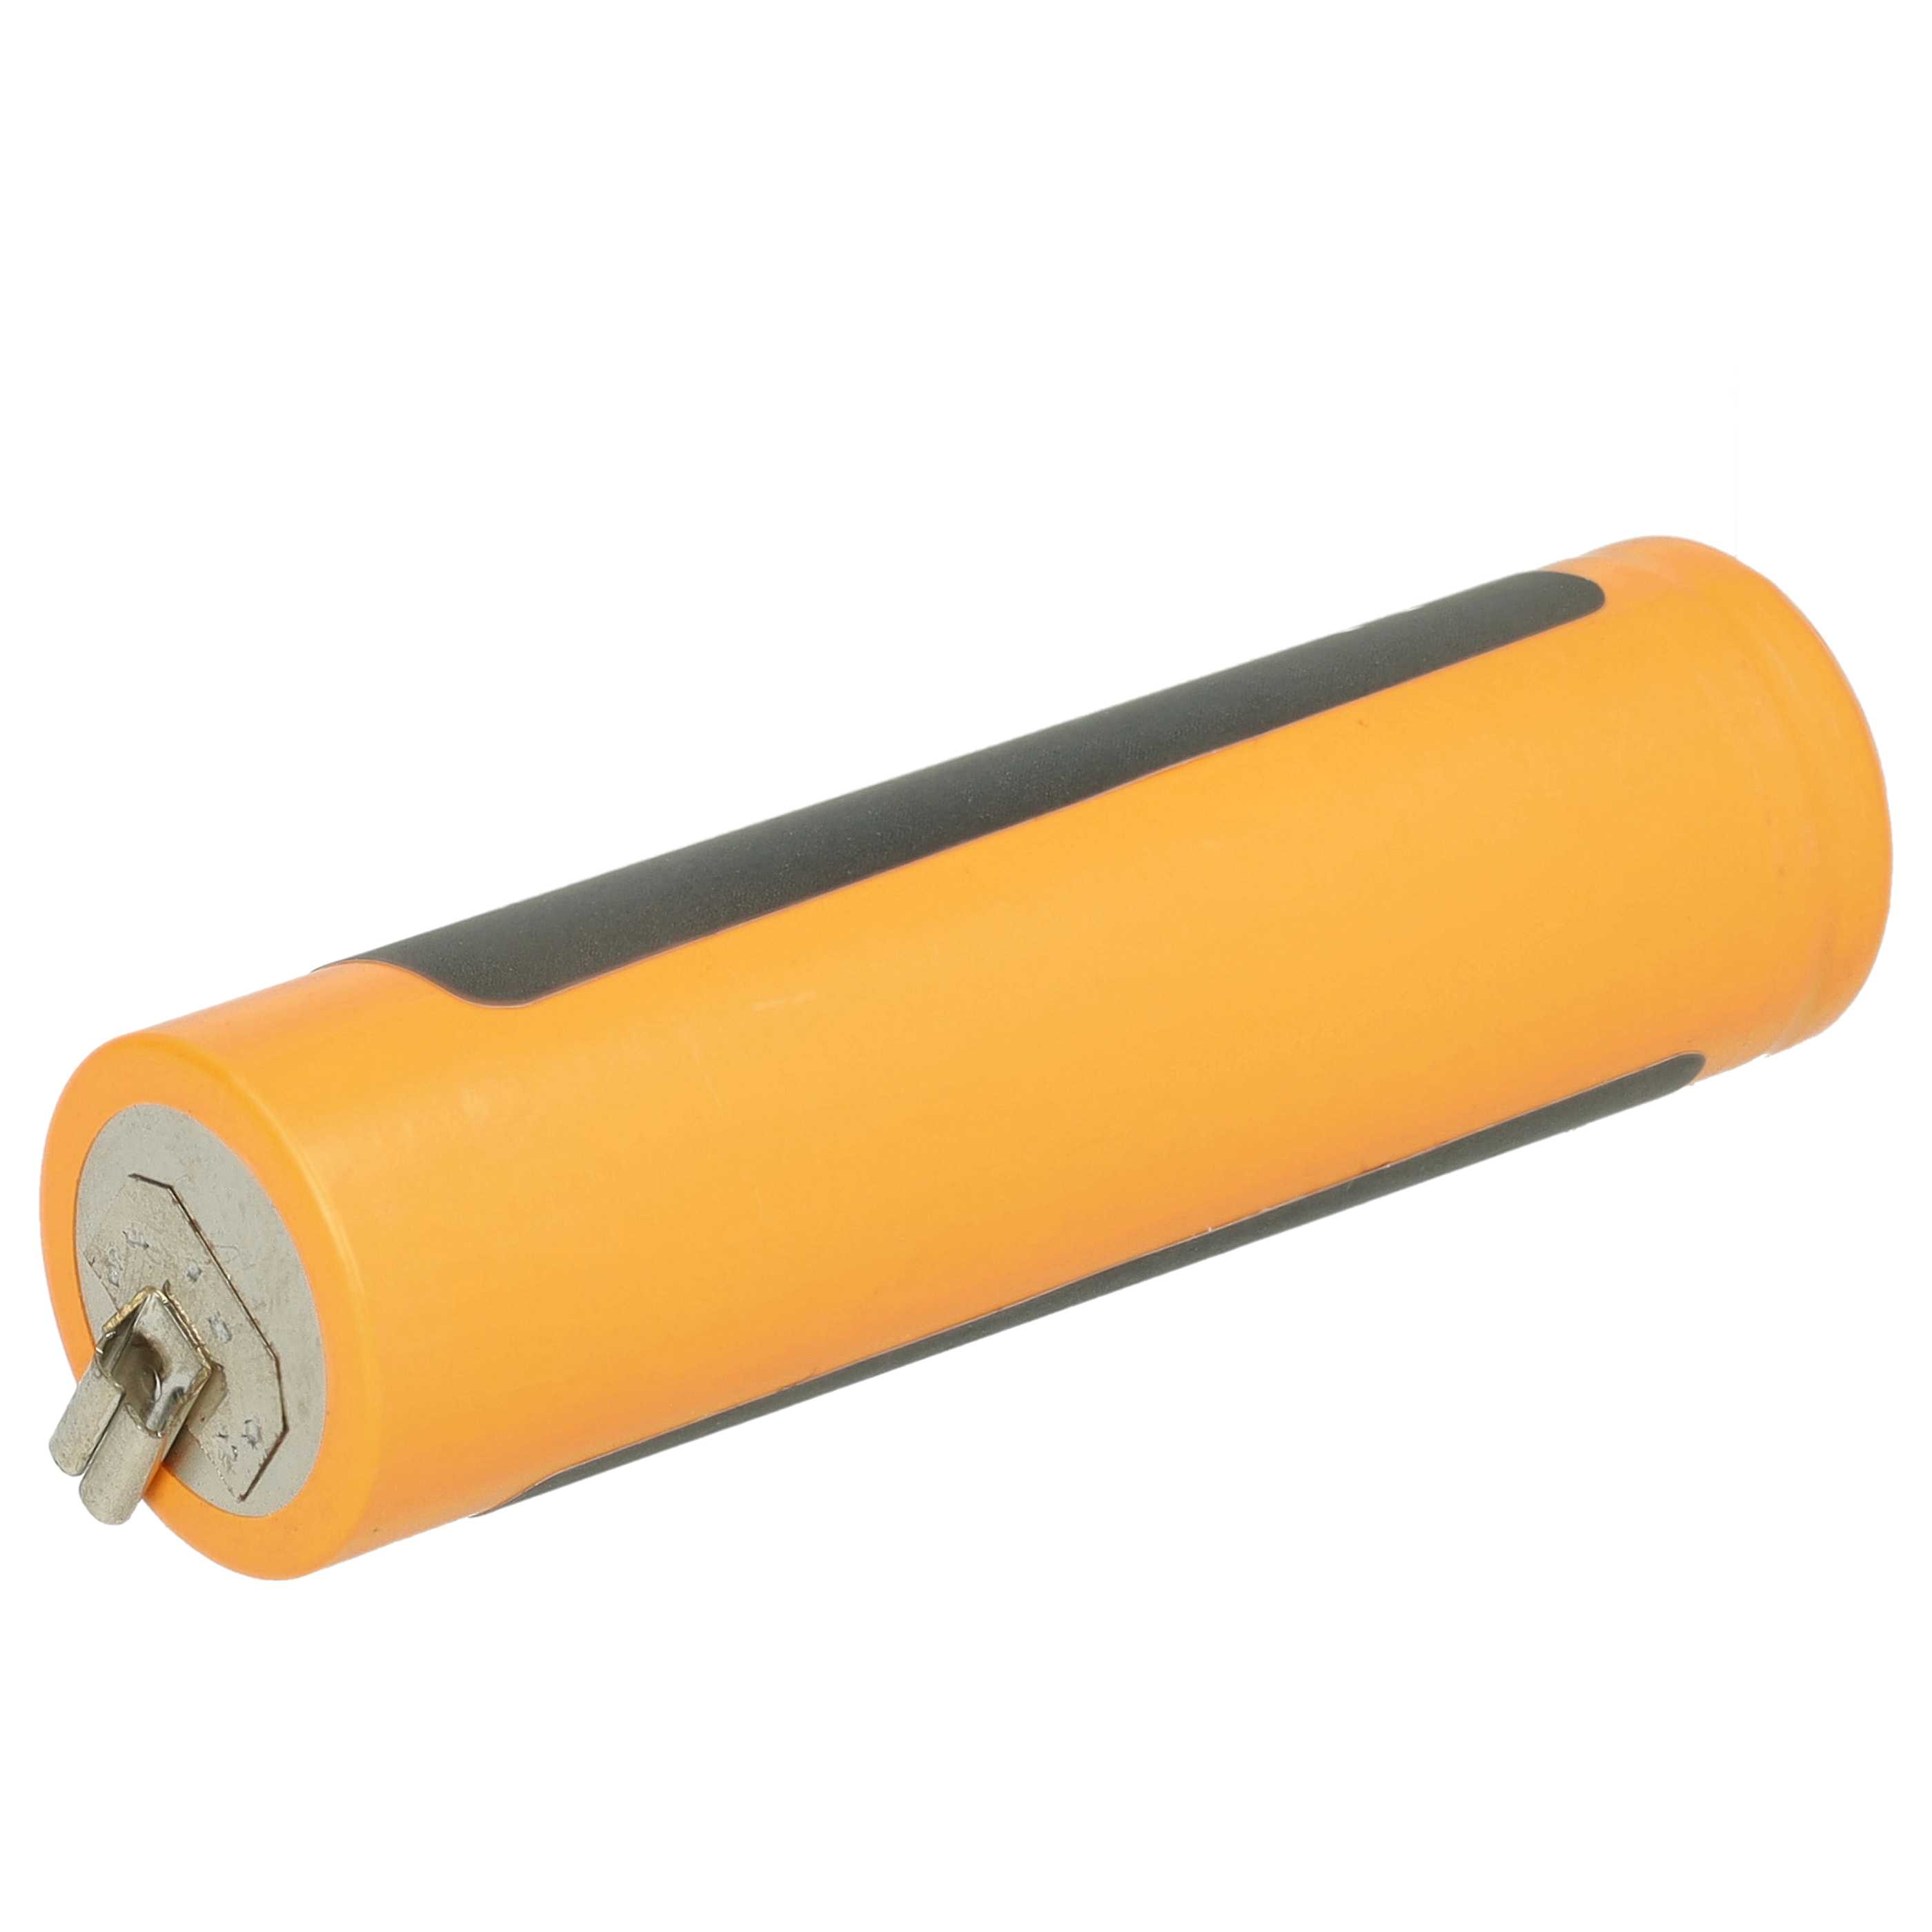 Hair Trimmer Battery Replacement for Moser 1884-7102 - 1800mAh 3.2V Li-Ion